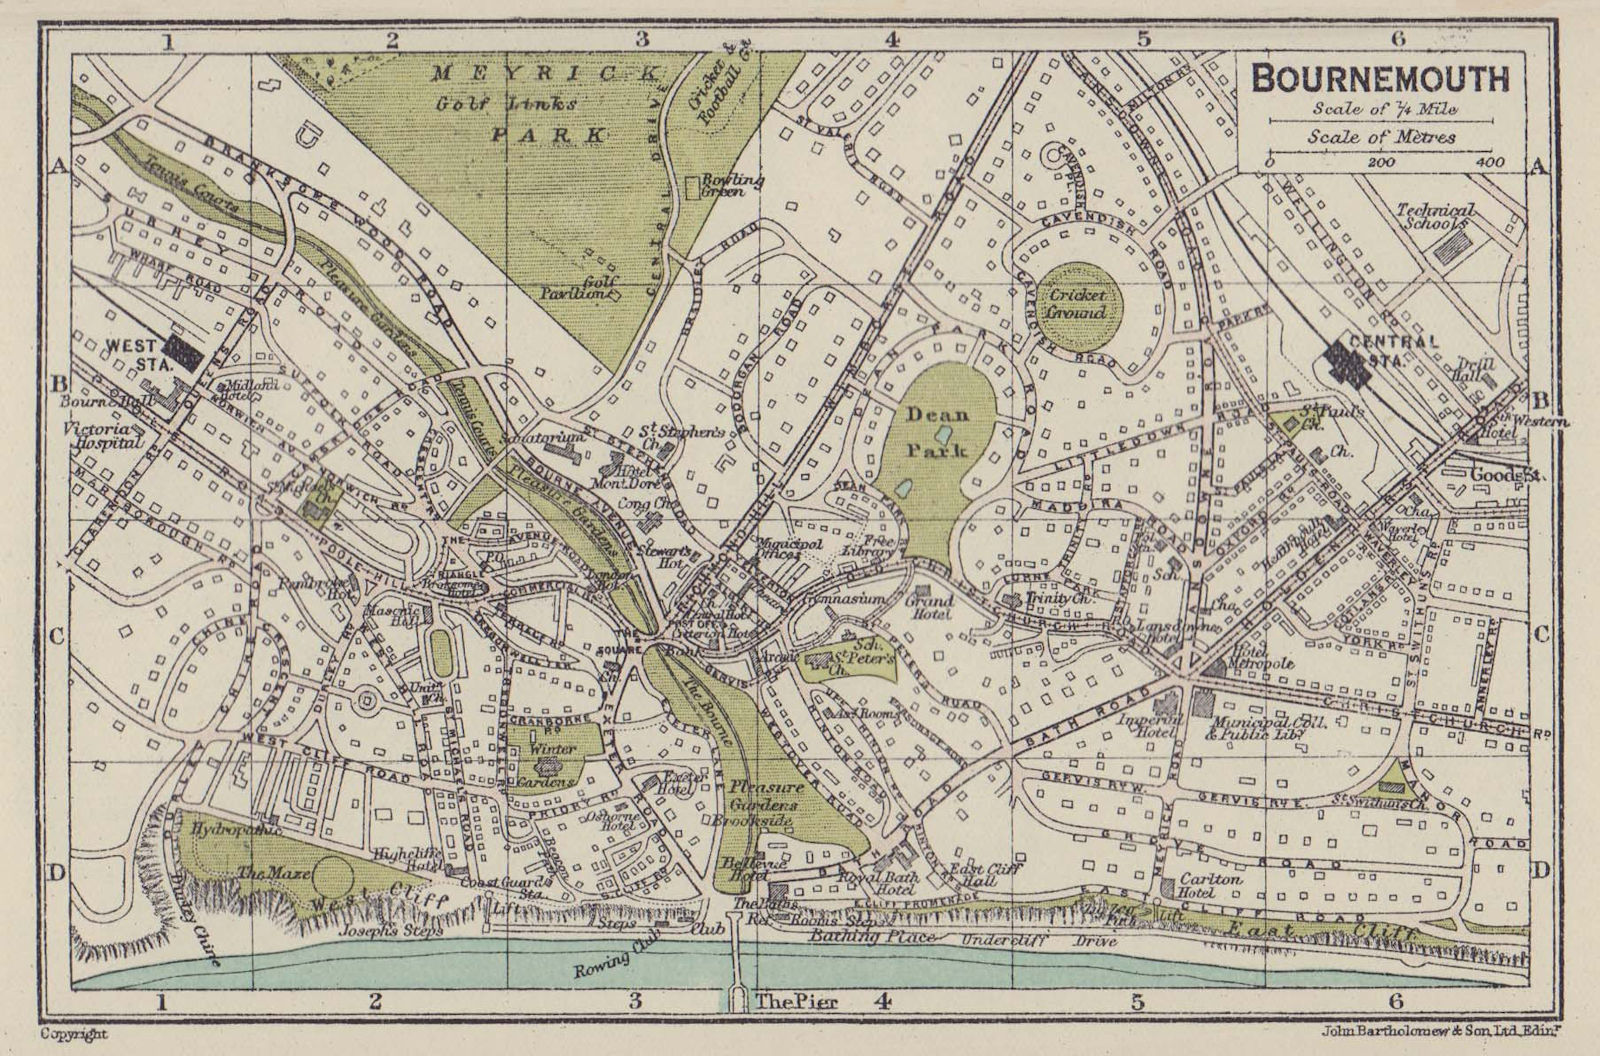 Associate Product BOURNEMOUTH town city plan. Hampshire 1920 old antique vintage map chart